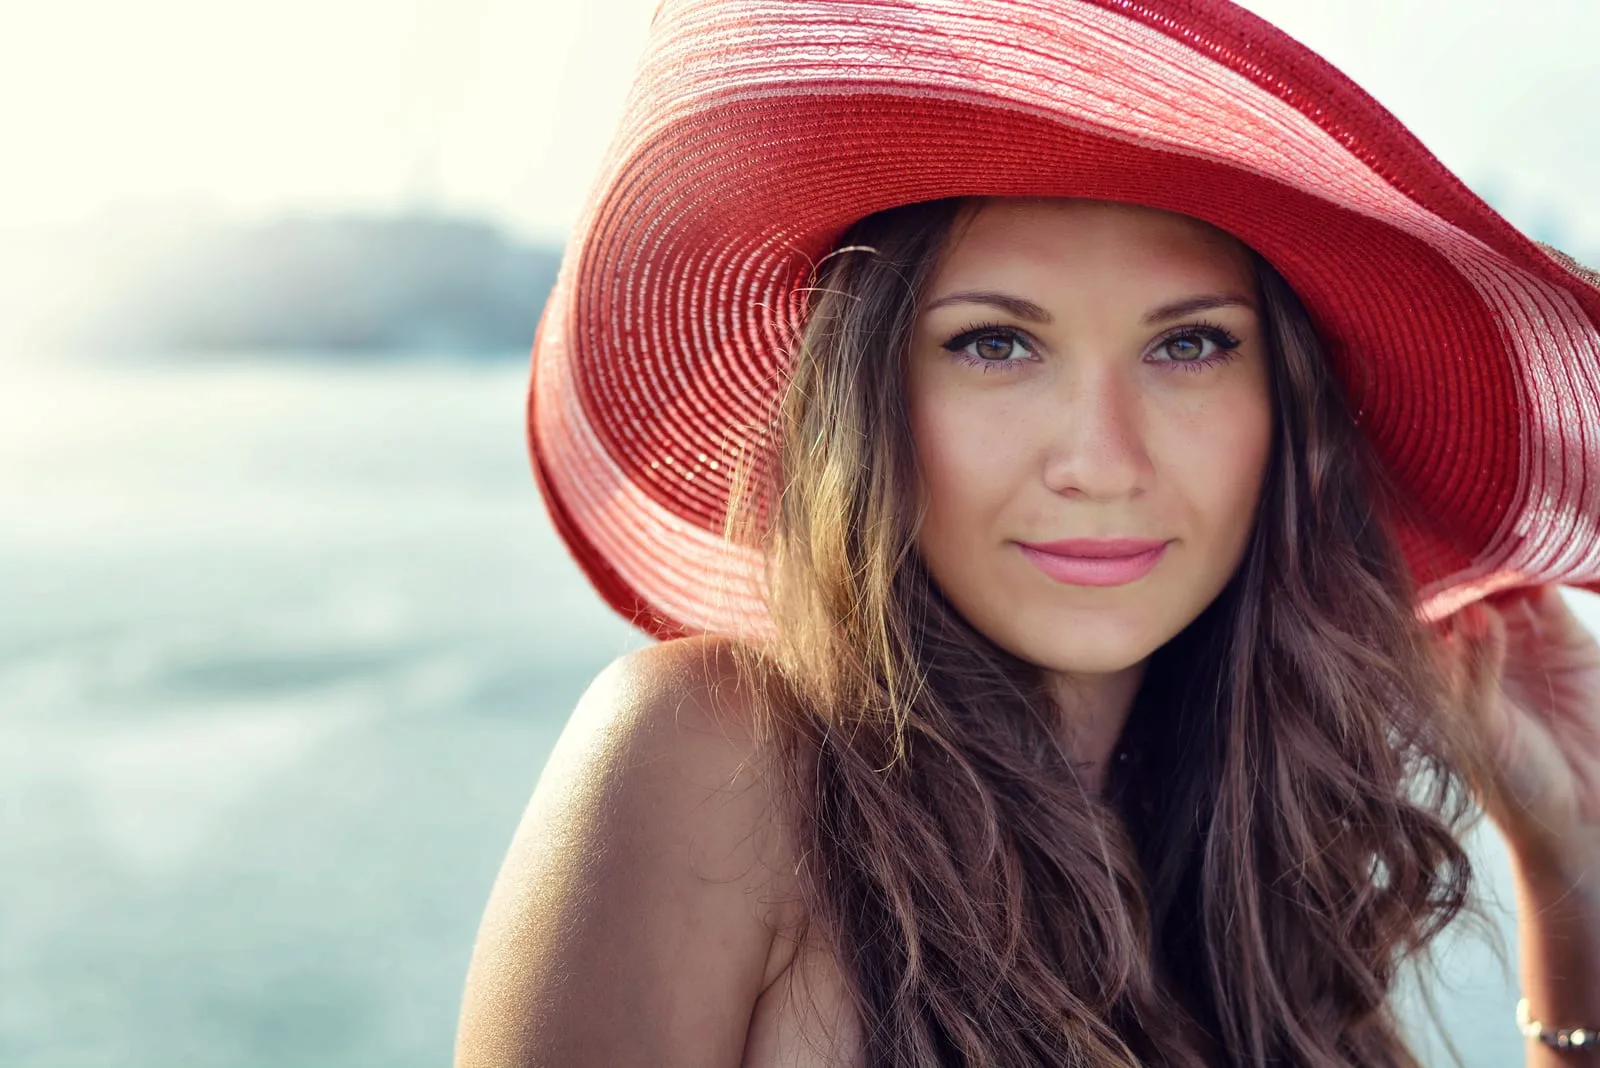 Beautiful girl in a red hat smiling